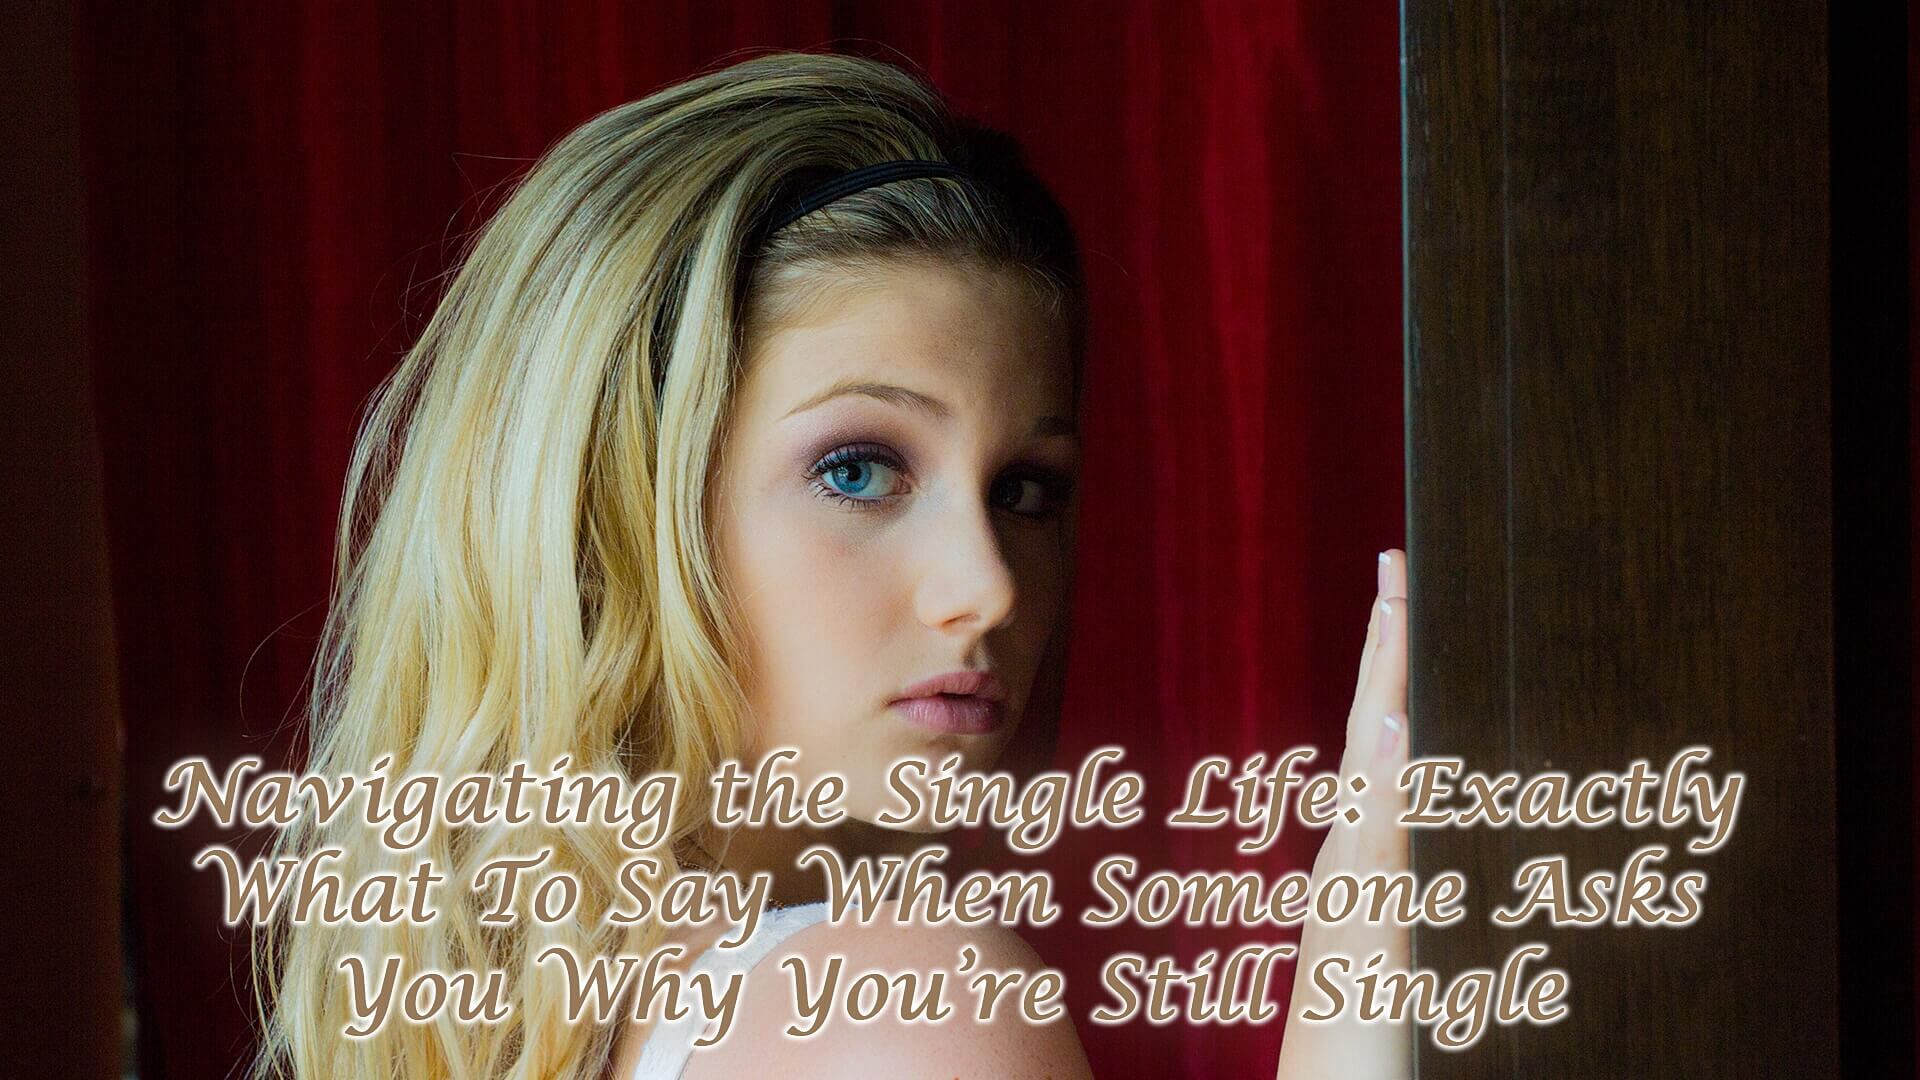 Exactly What To Say When Someone Asks You Why You’re Still Single